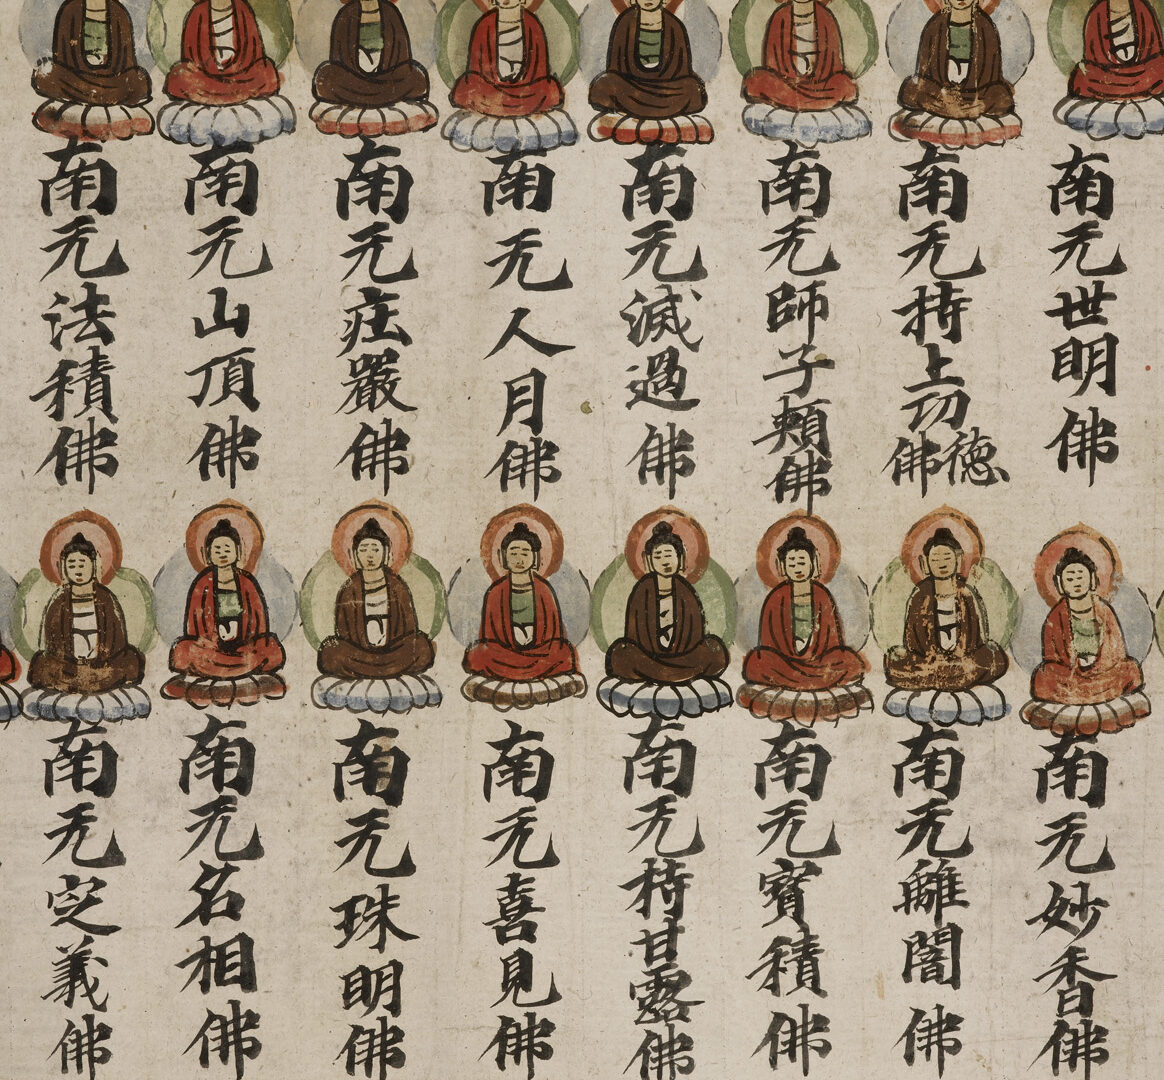 Image of manuscript Or.8210/S.253, featuring the Buddha's many names.